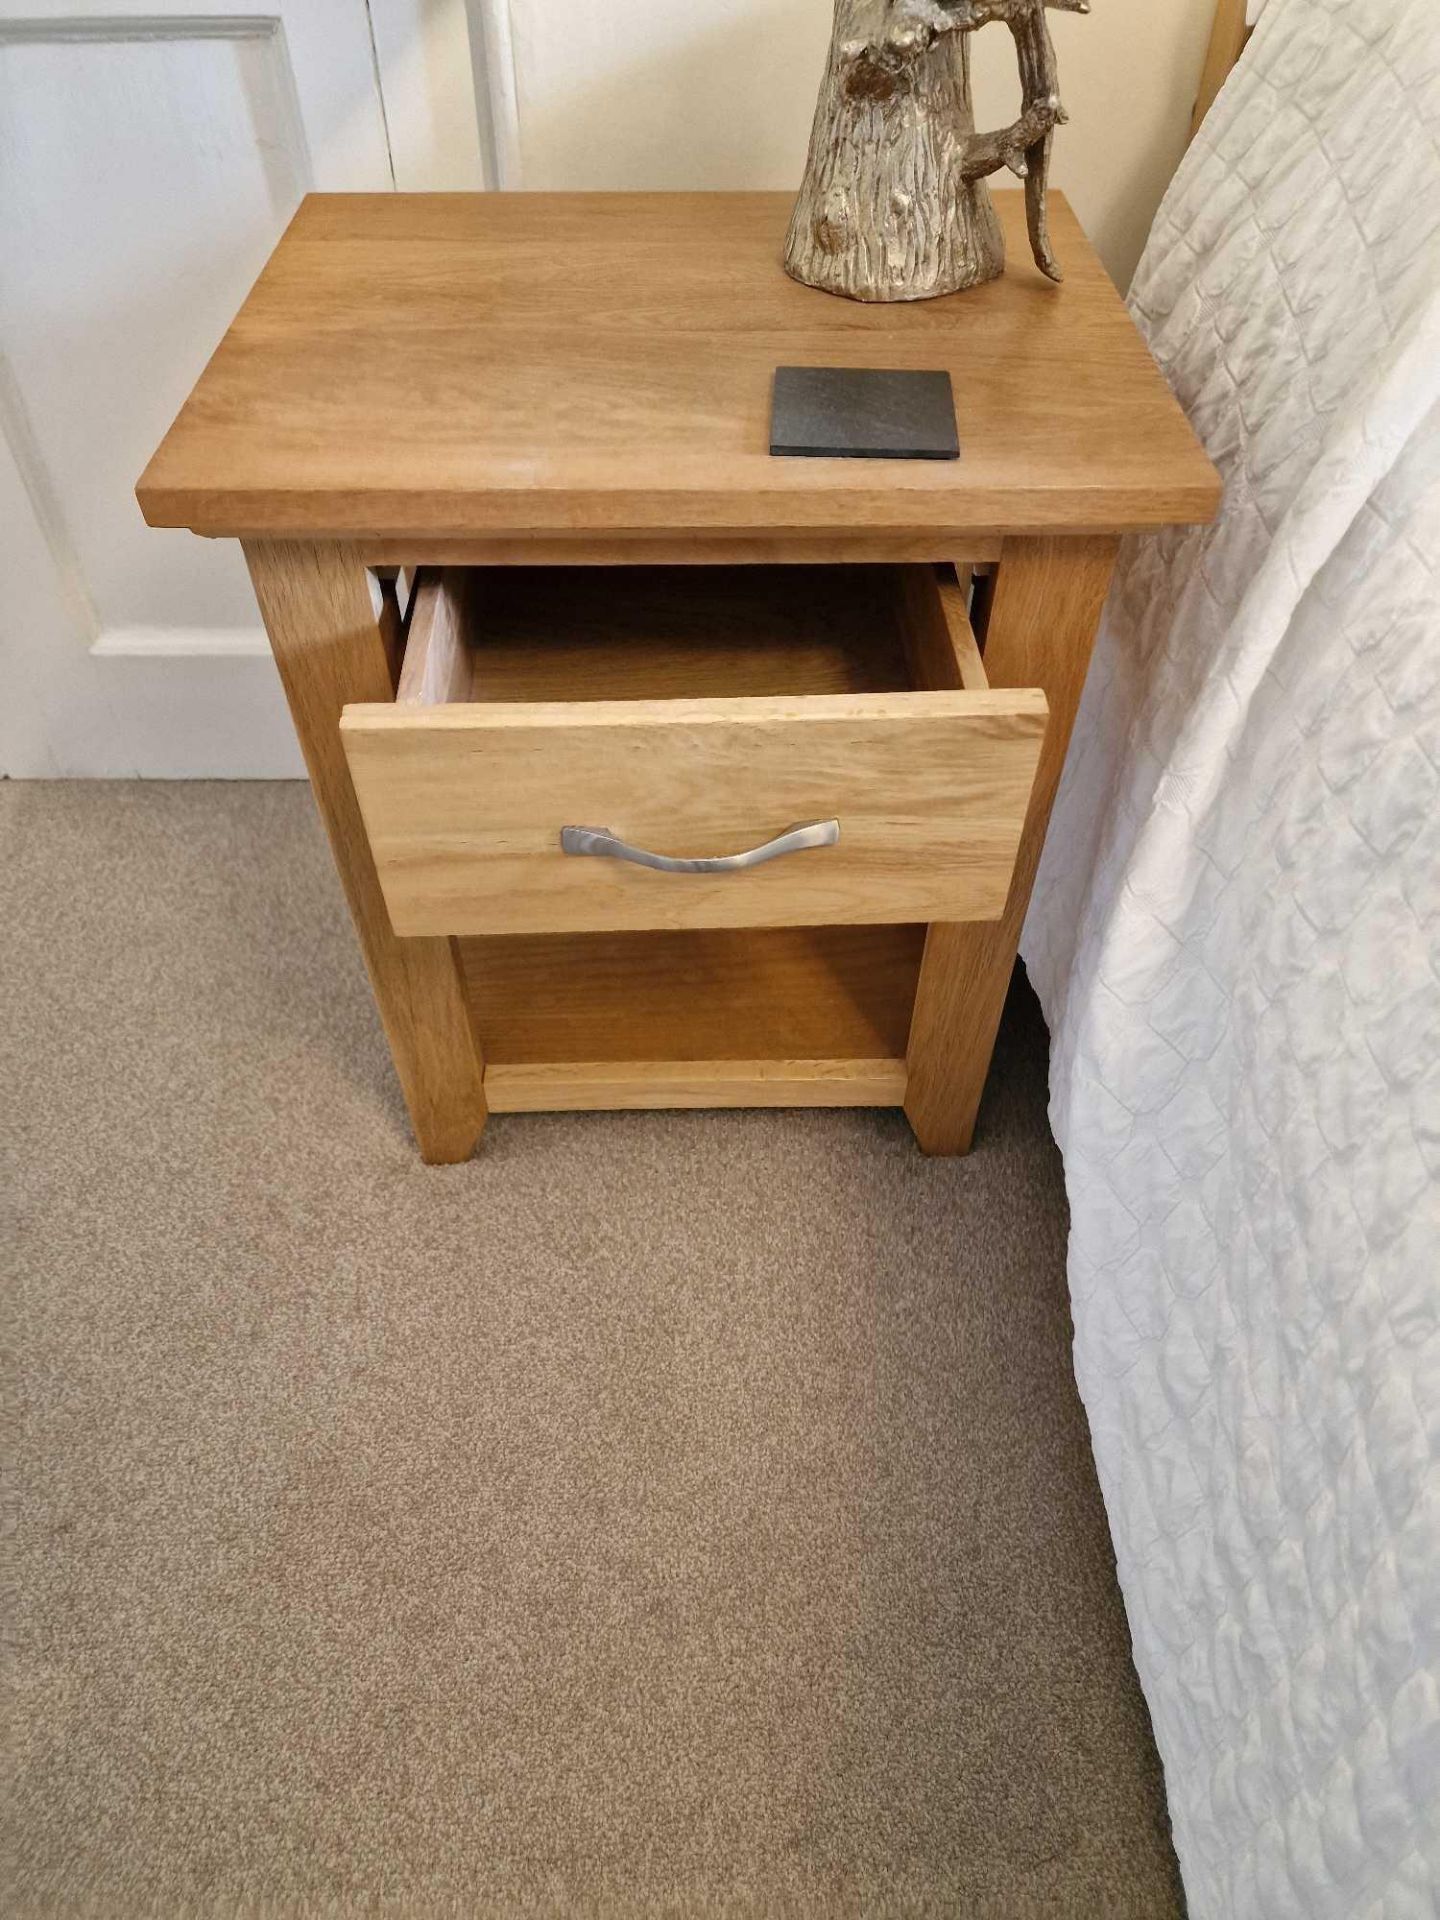 A Pair Of Bedside Tables Light Oak Finished With A Satin VarnishÃ‚ Highlights The Natural Grain Of - Bild 2 aus 2